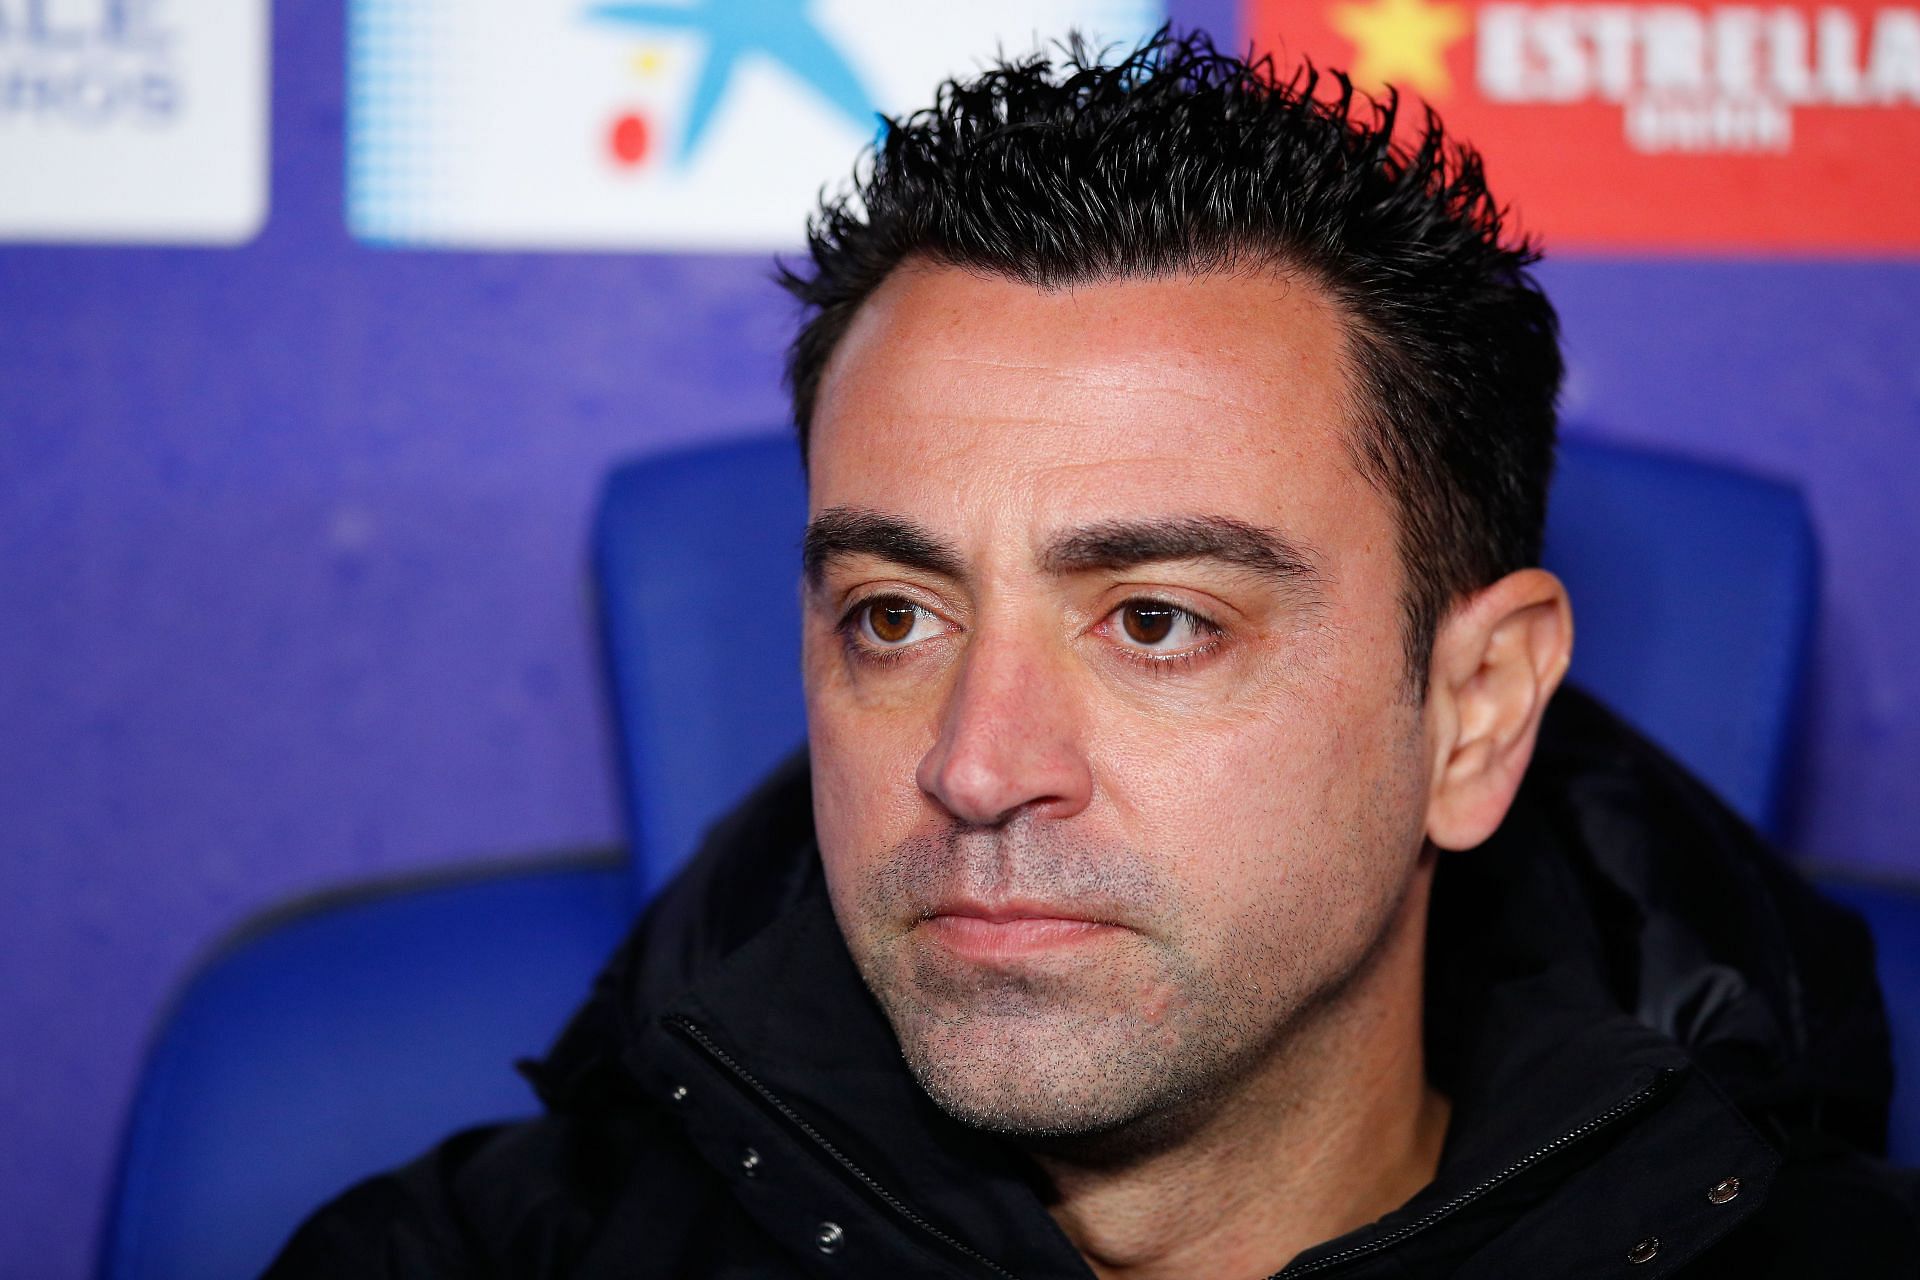 Barcelona manager Xavi is desperate to secure a top-four finish.